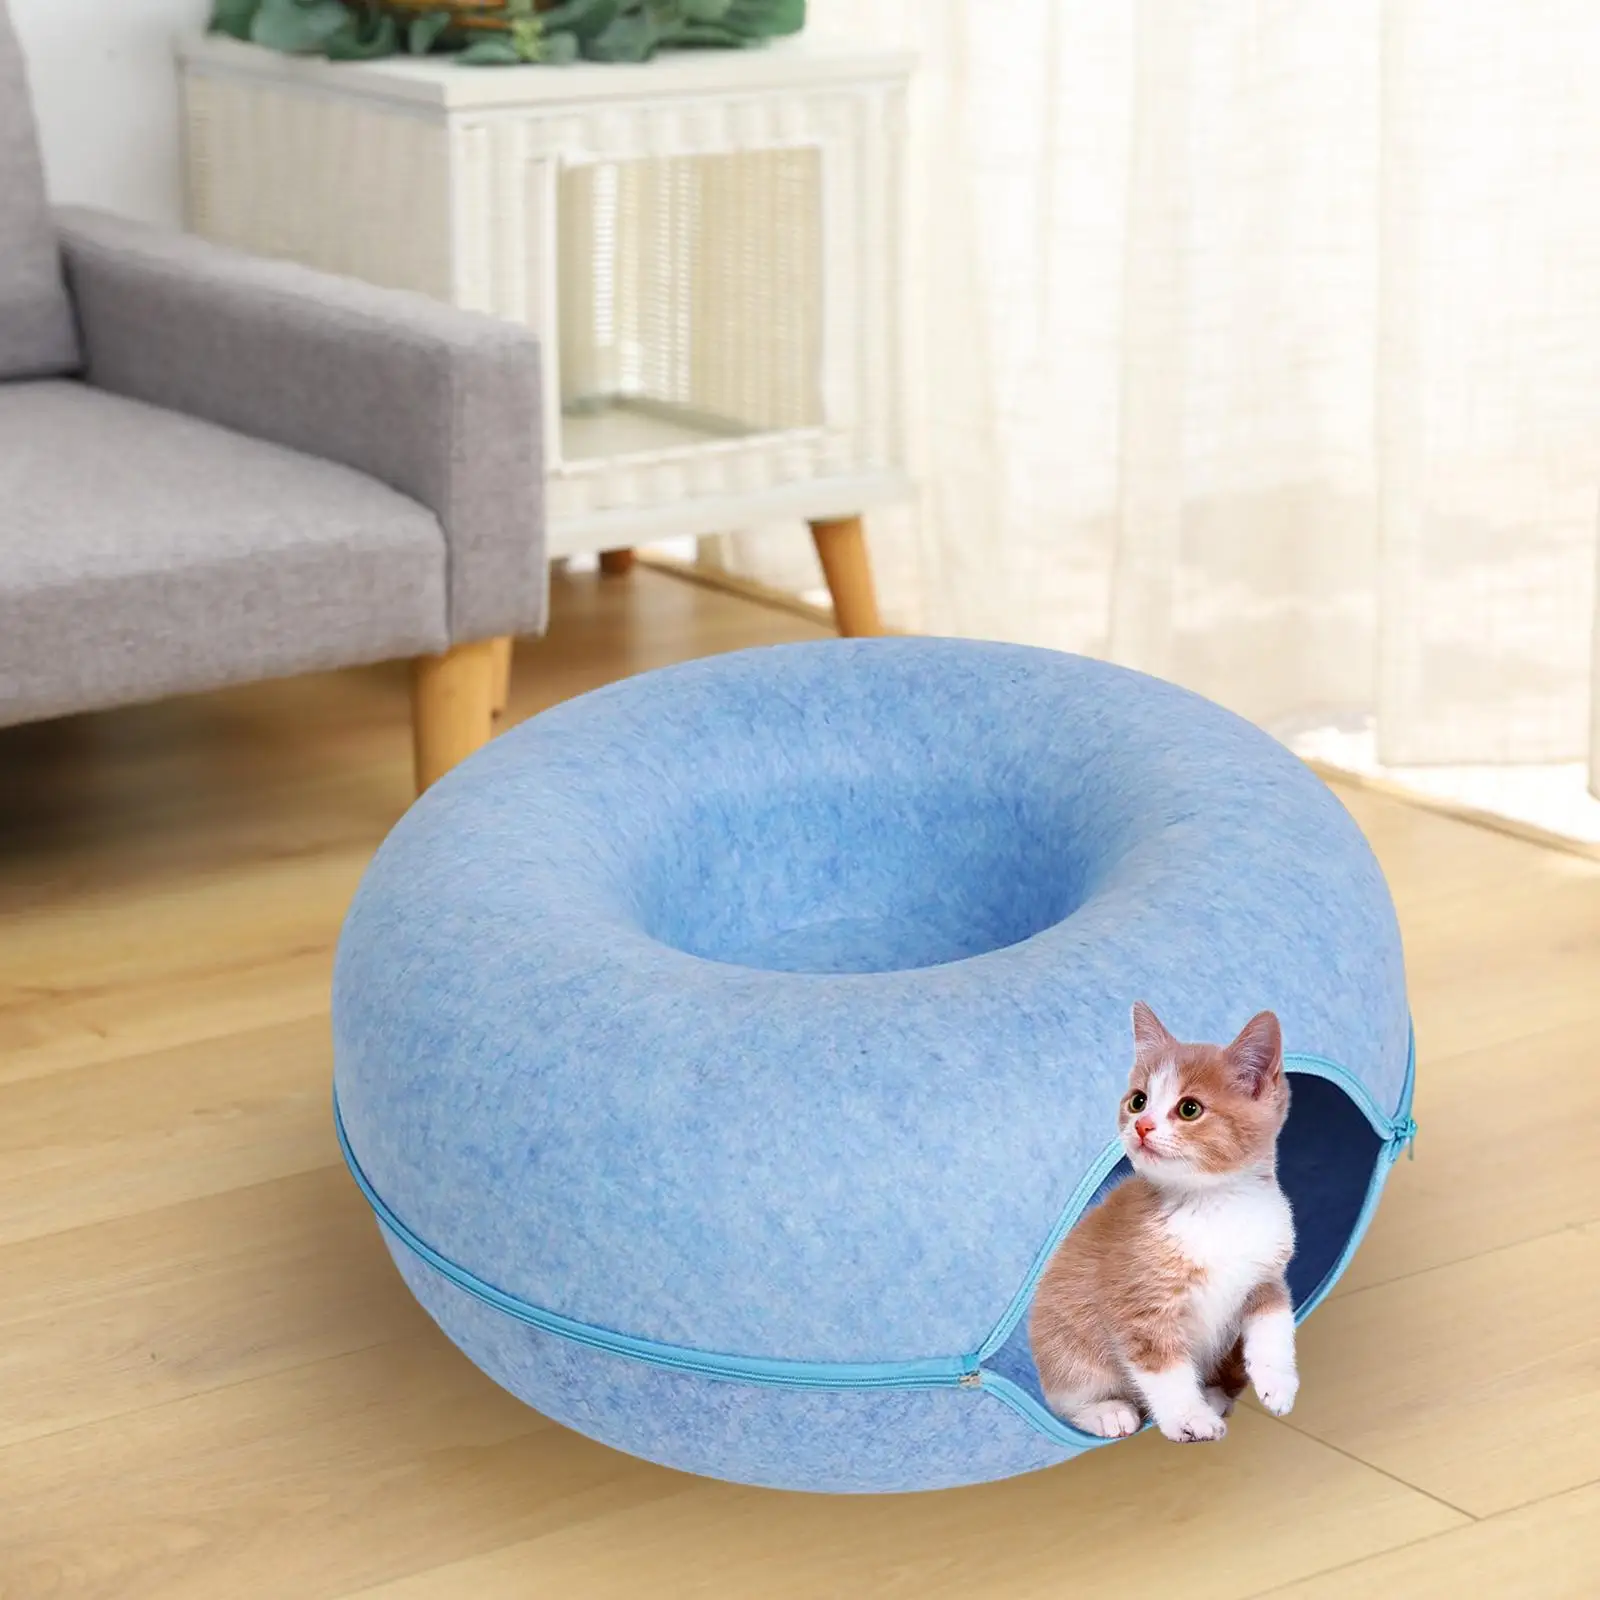 Felt Cave for Cat Removable Indoor Cats Washable Hideaway Cave Nest Tunnel